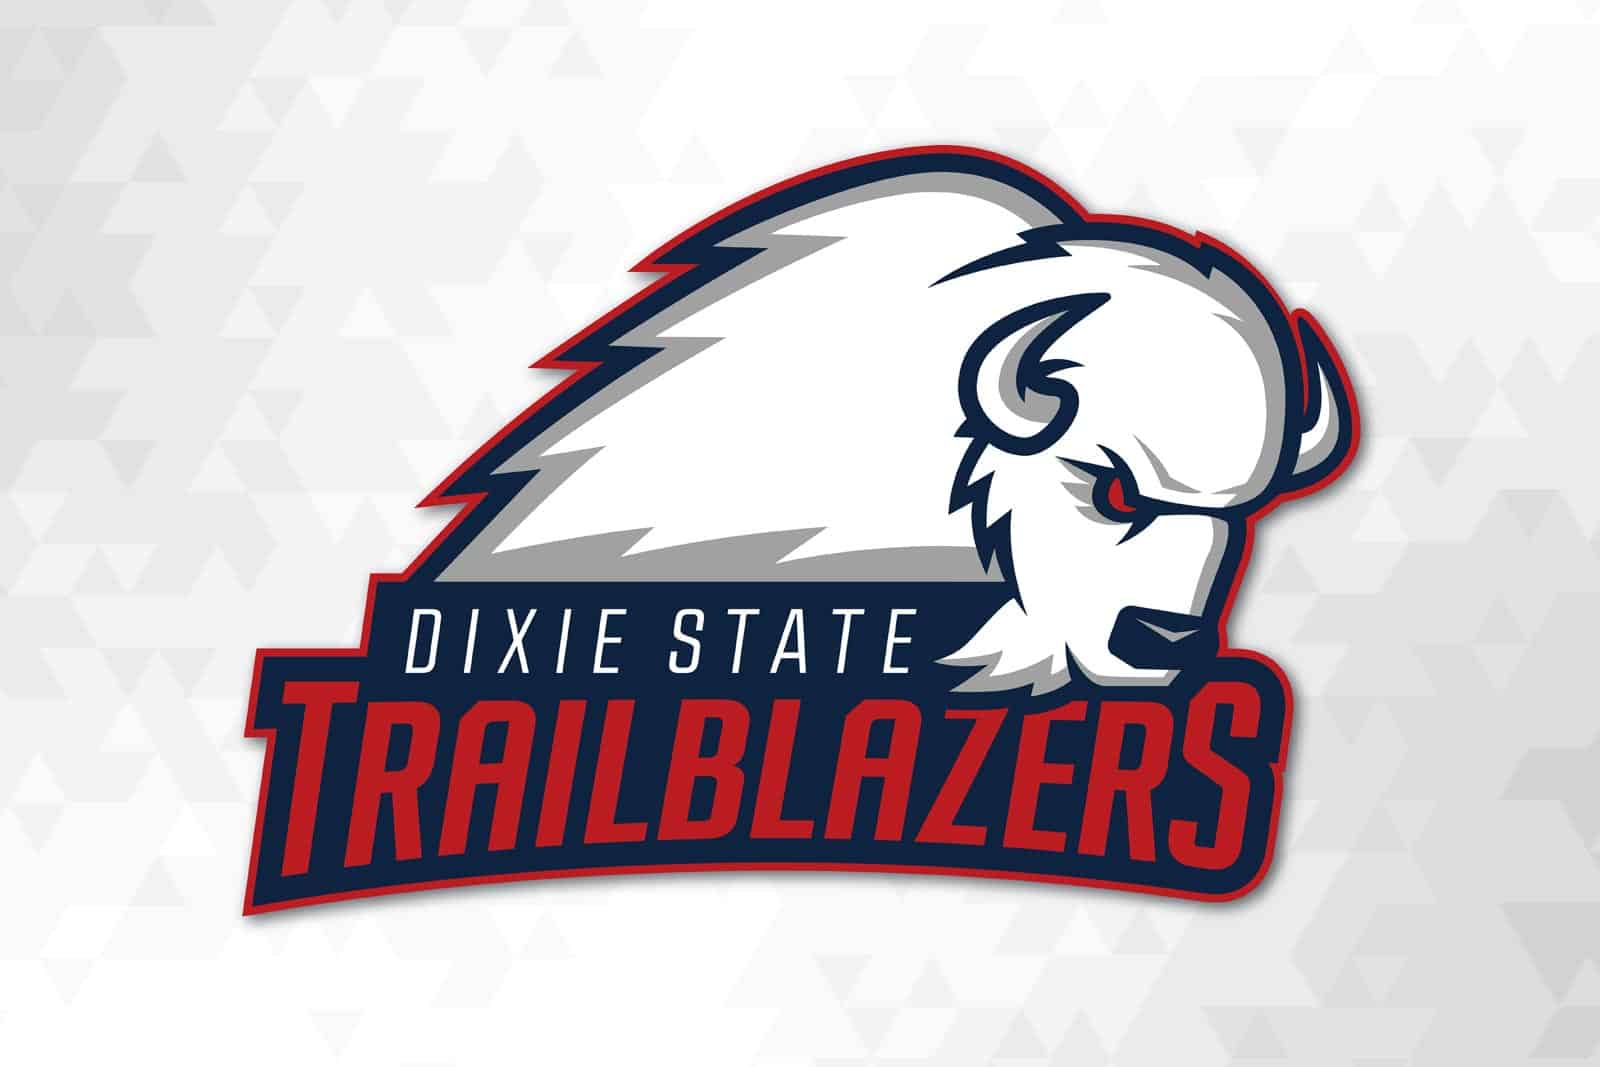 Dixie State